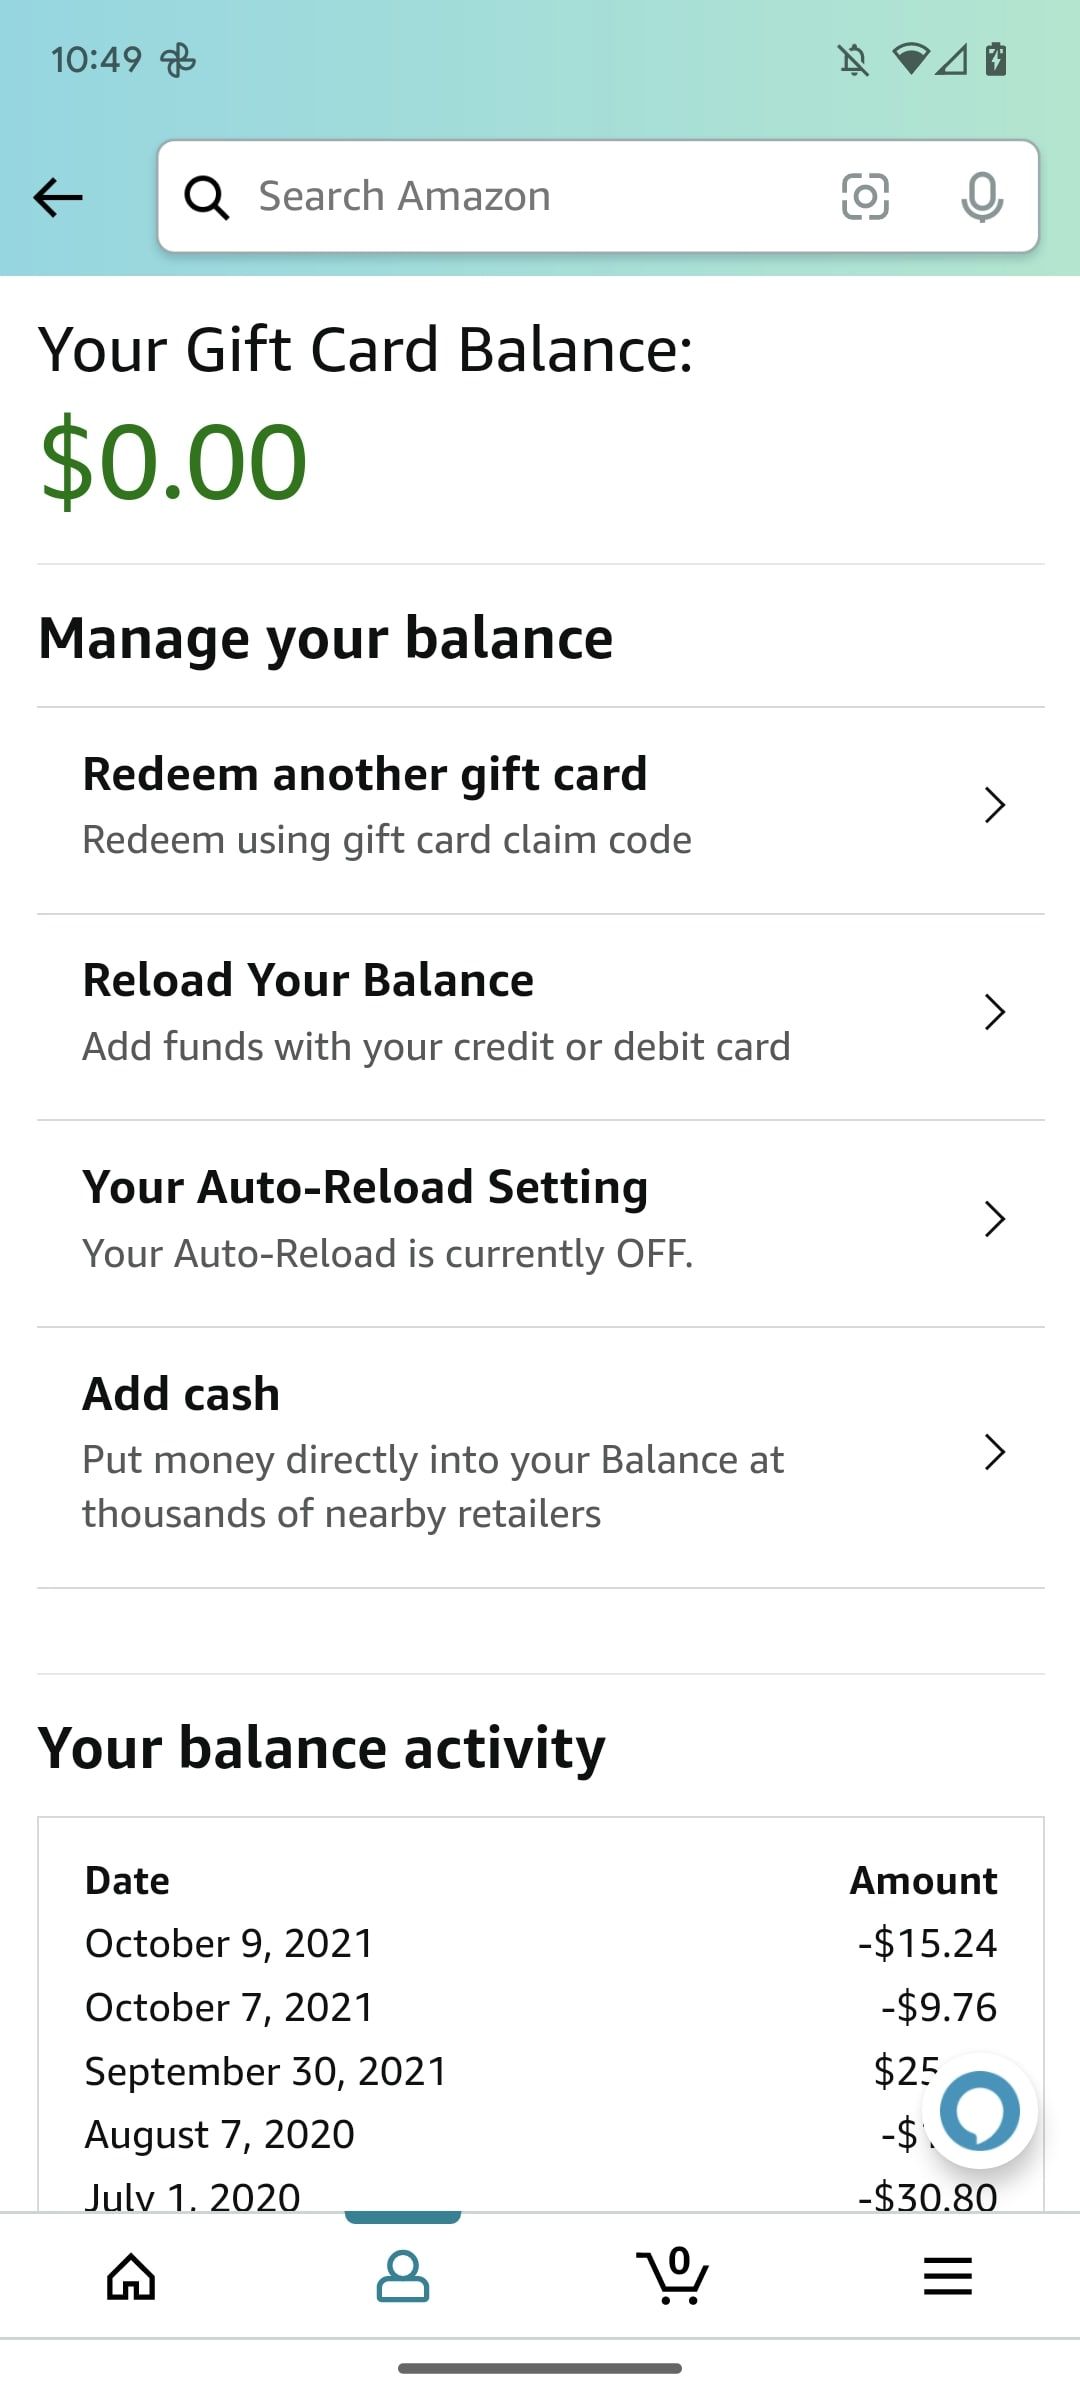 How to check your  gift card balance